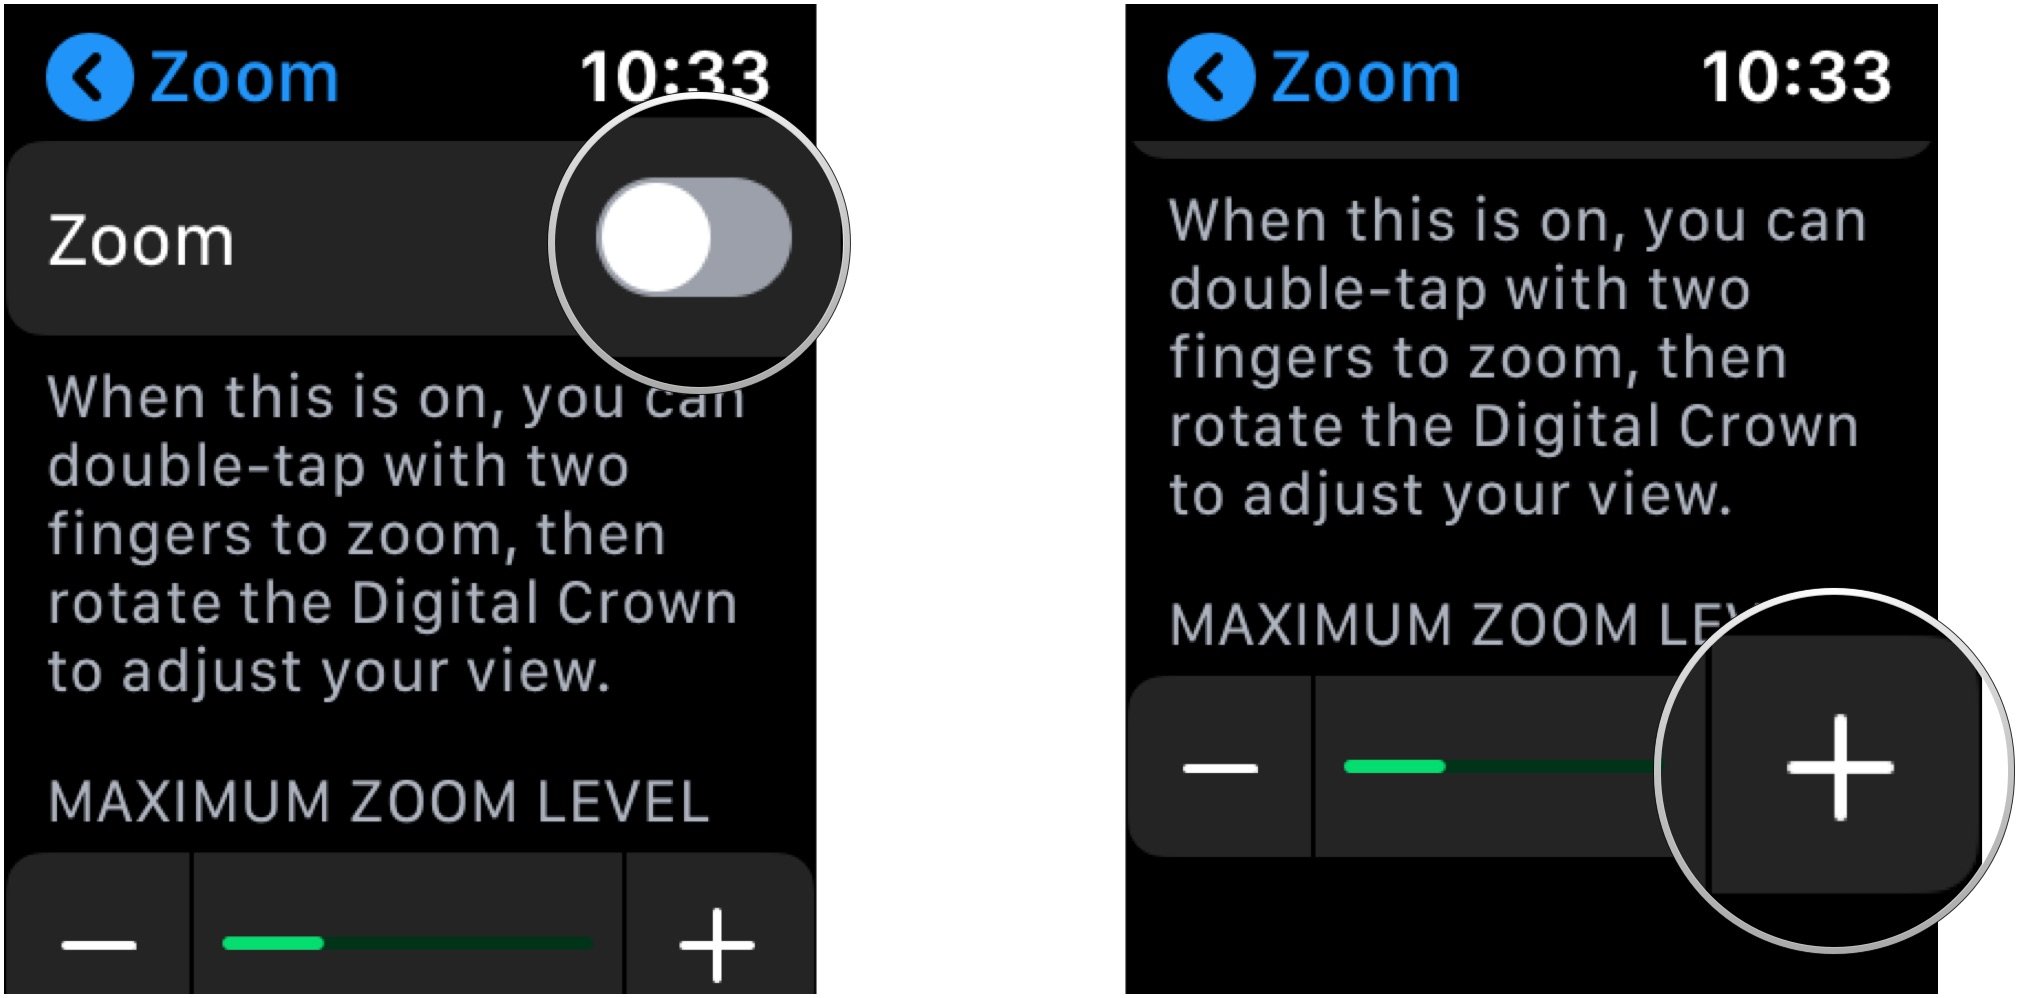 Enable Zoom on Apple Watch, showing how to tap the Zoom switch, then tap the + or - button to adjust maximum zoom level